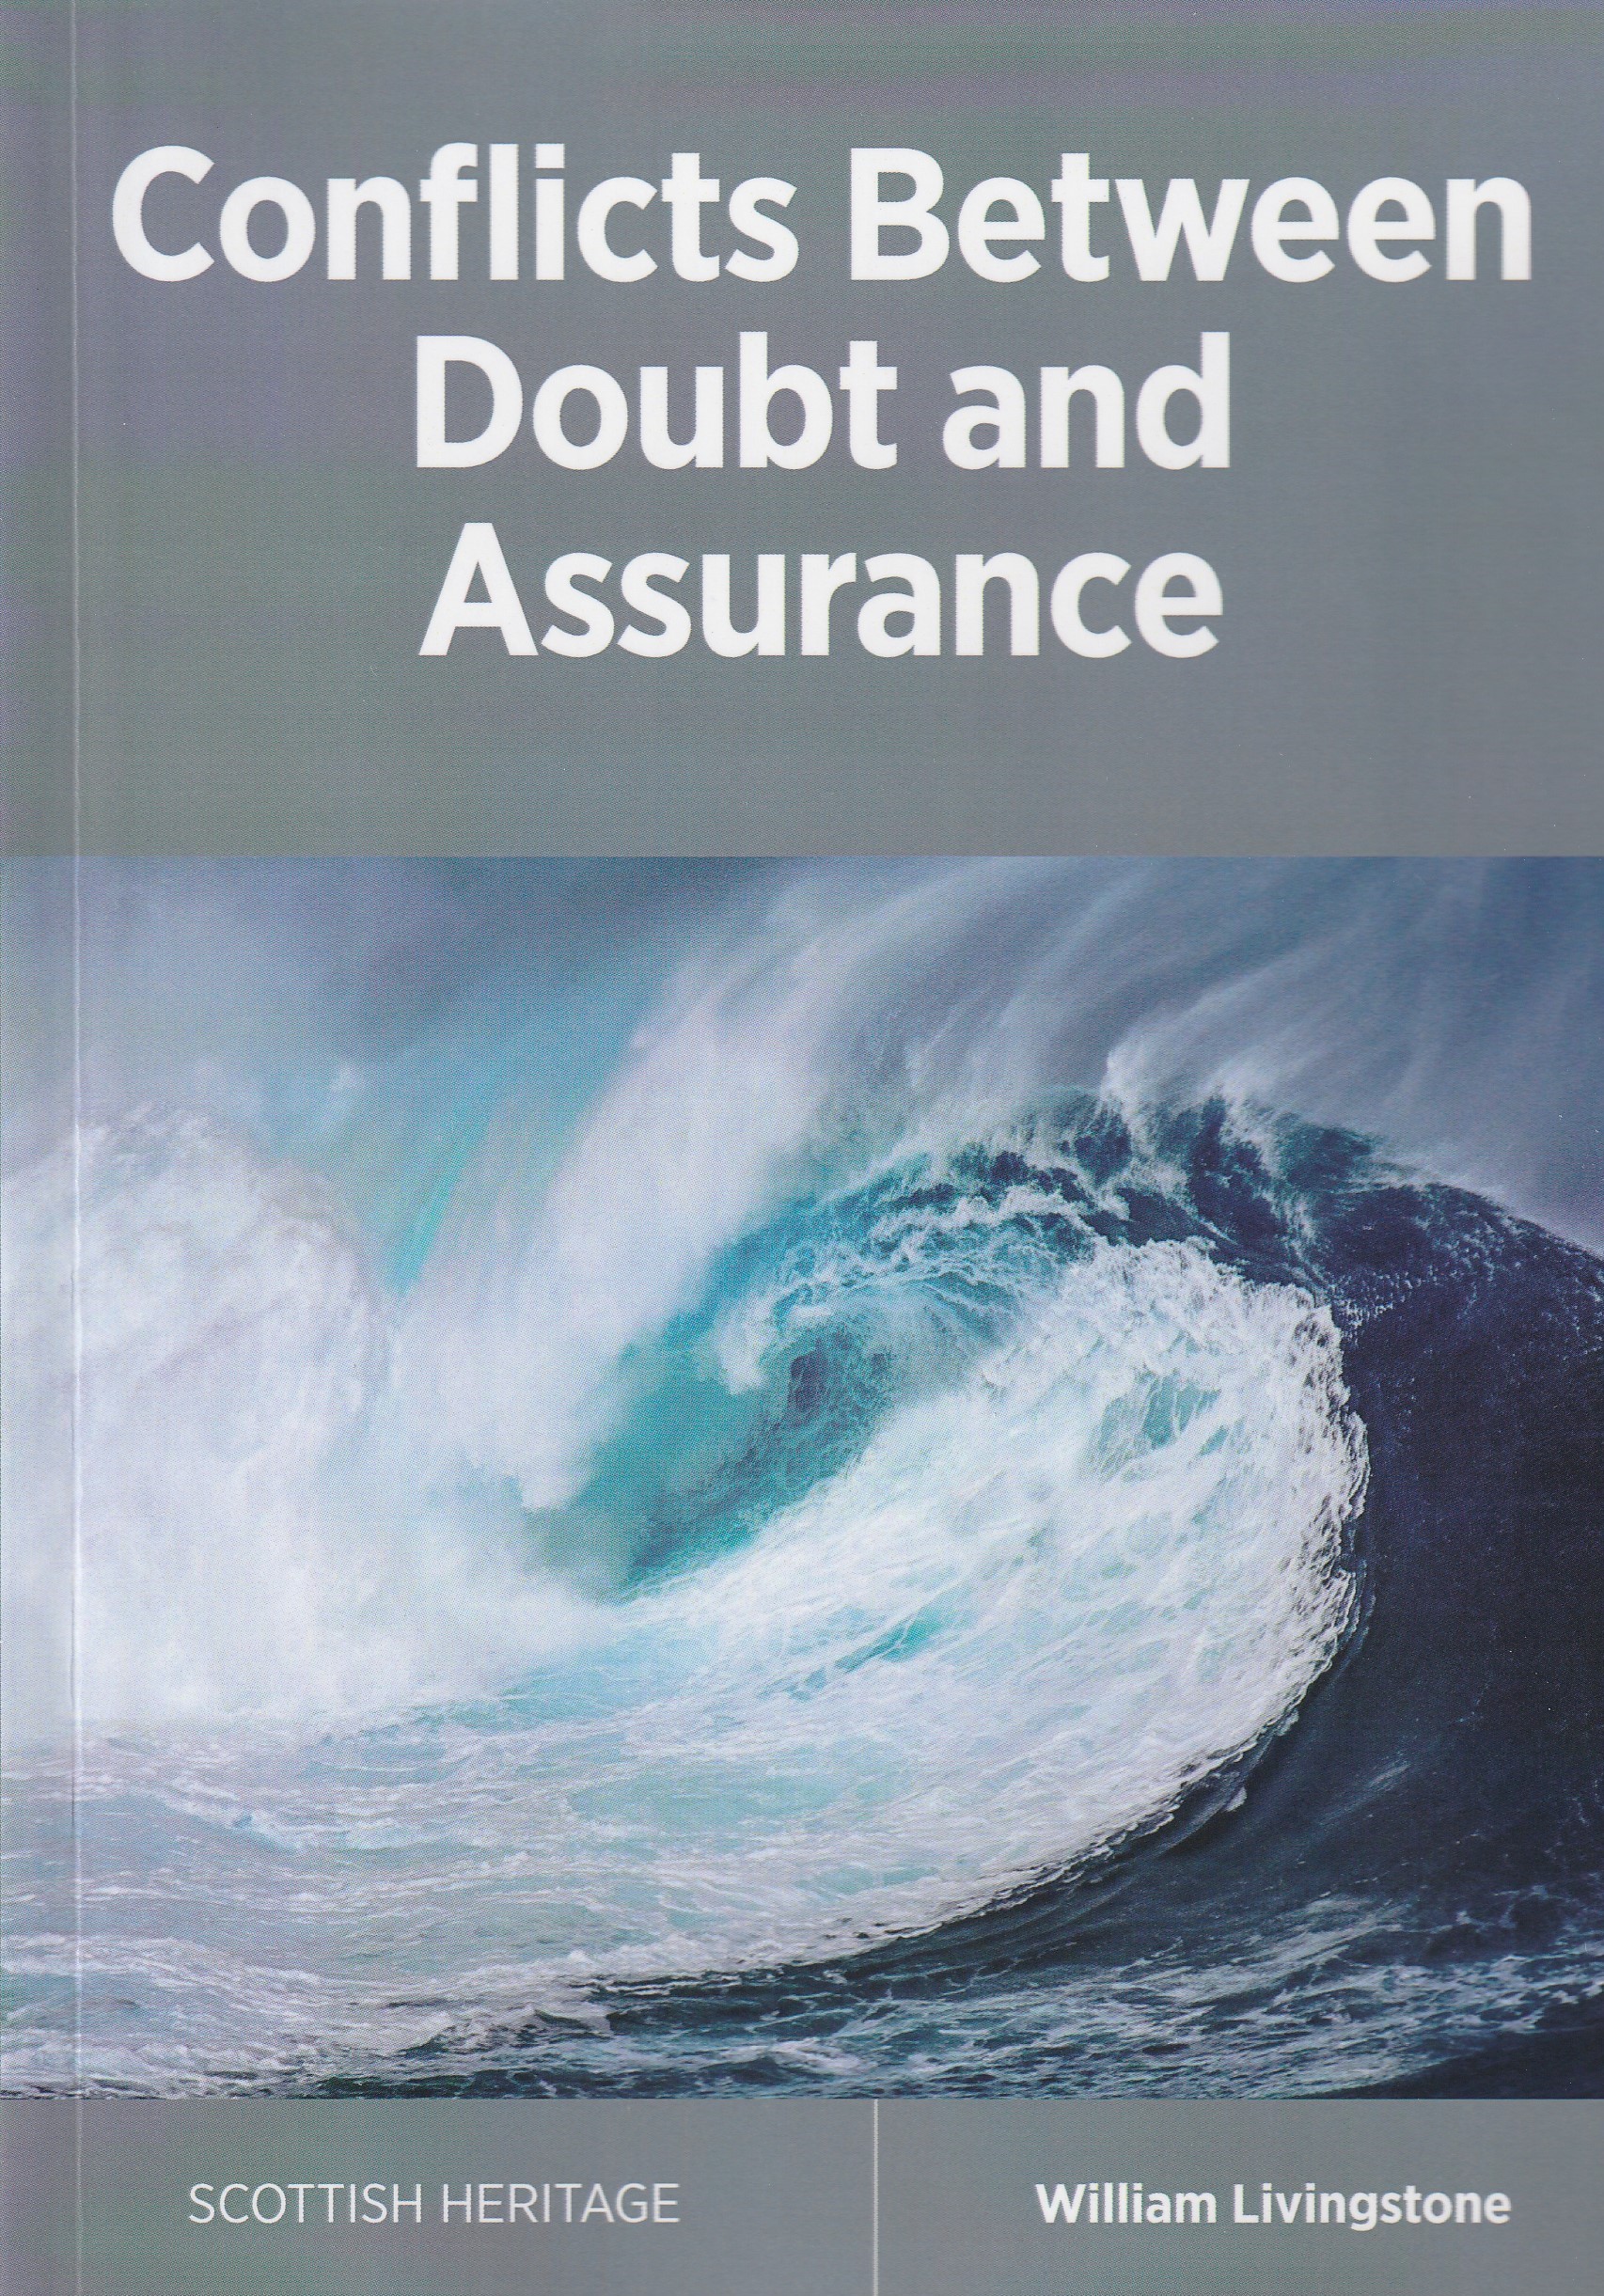 Conflicts Between Doubt and Assurance